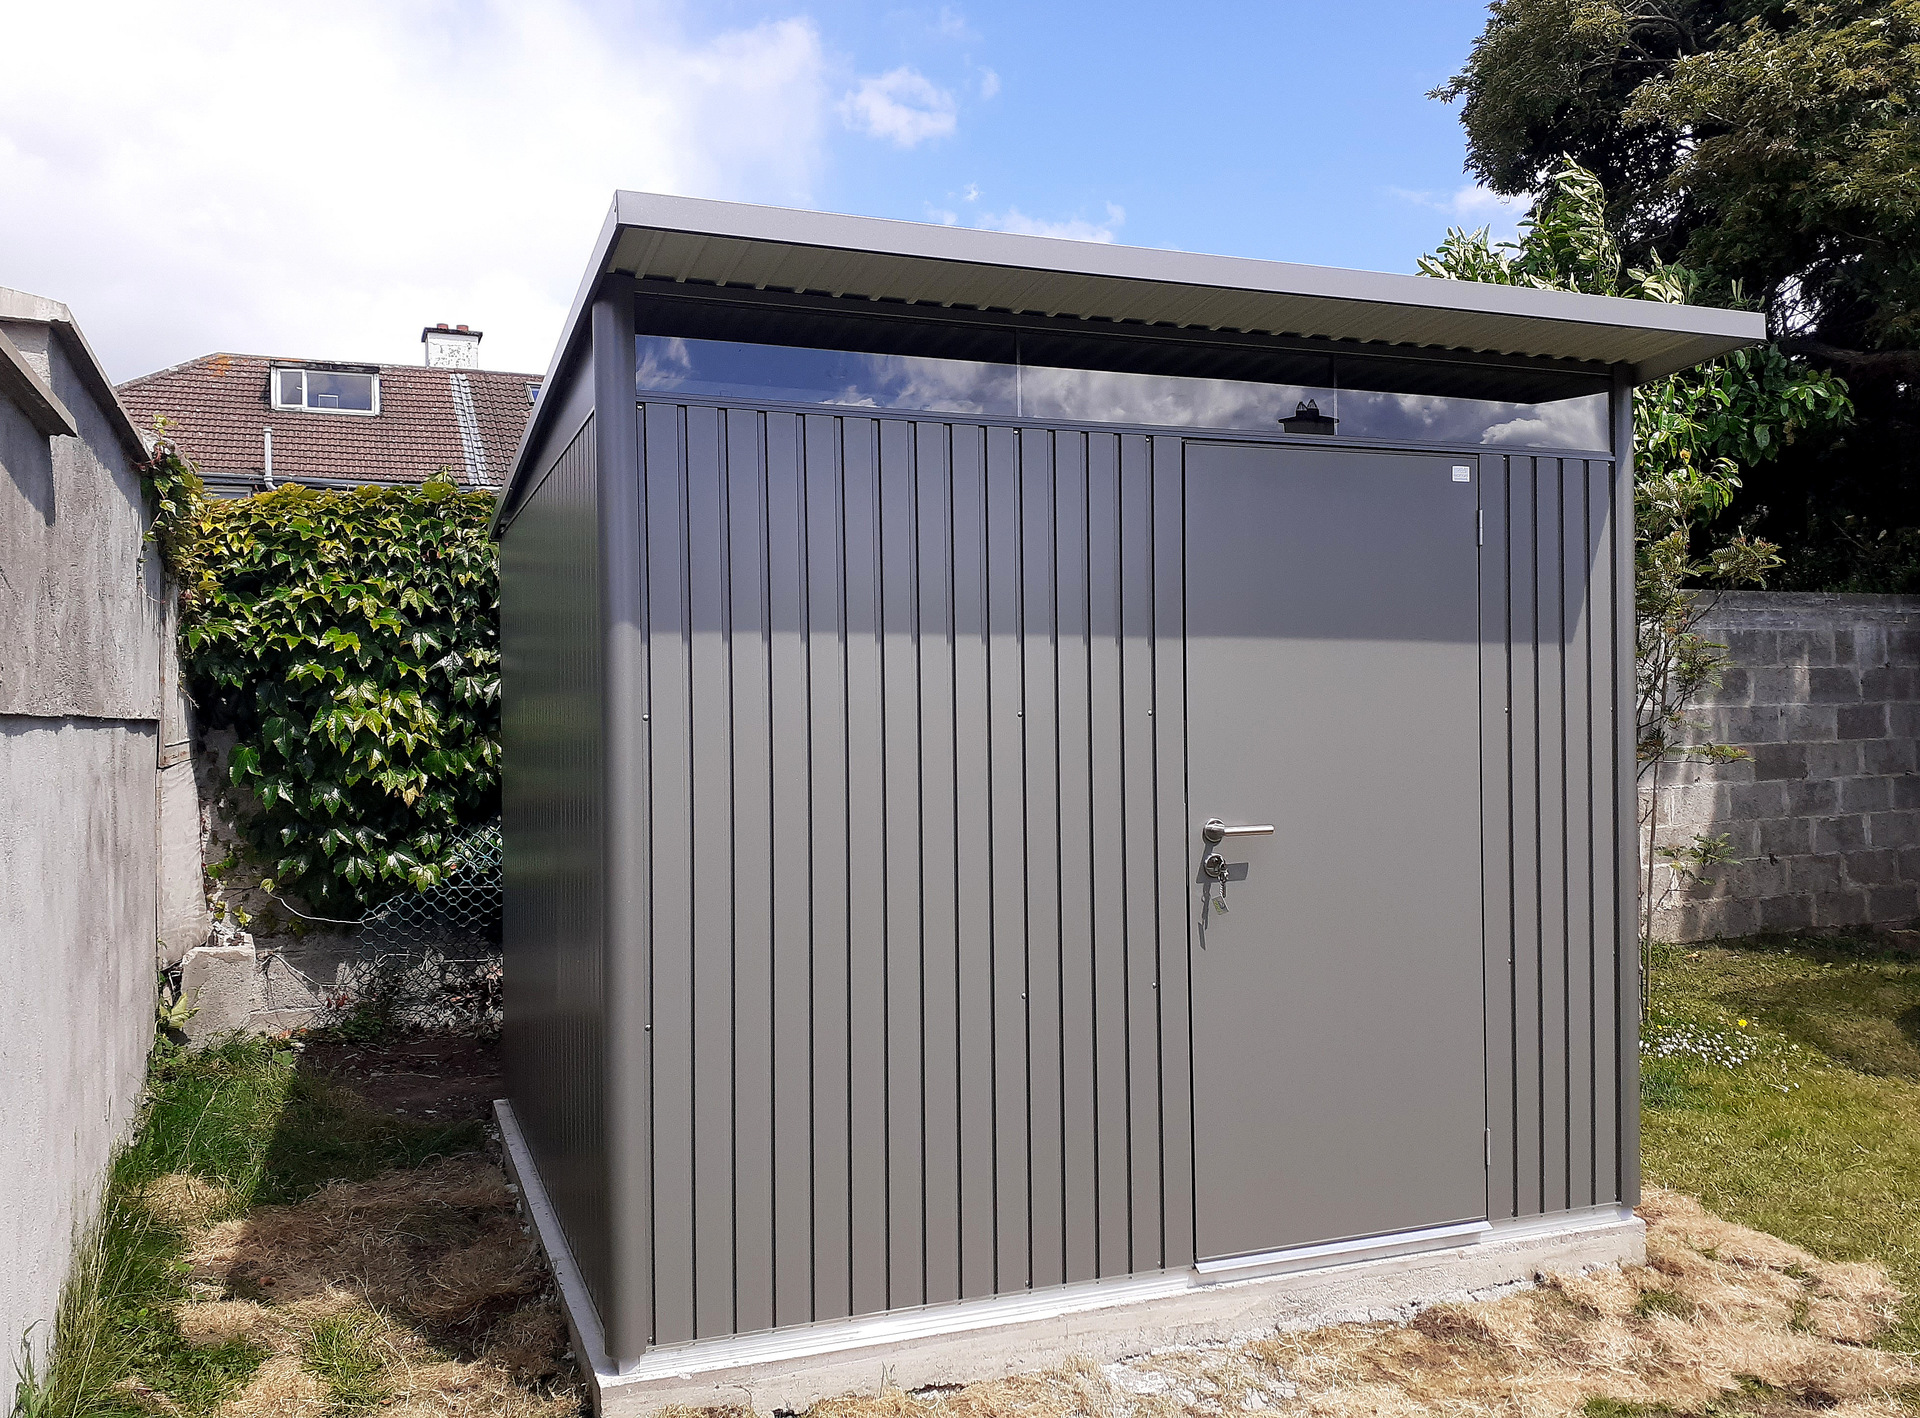 The contemporary style of Biohort AvantGarde A7 Garden Shed - supplied + fitted in Mount Merrion, Co Dublin | Owen Chubb Garden Landscapers